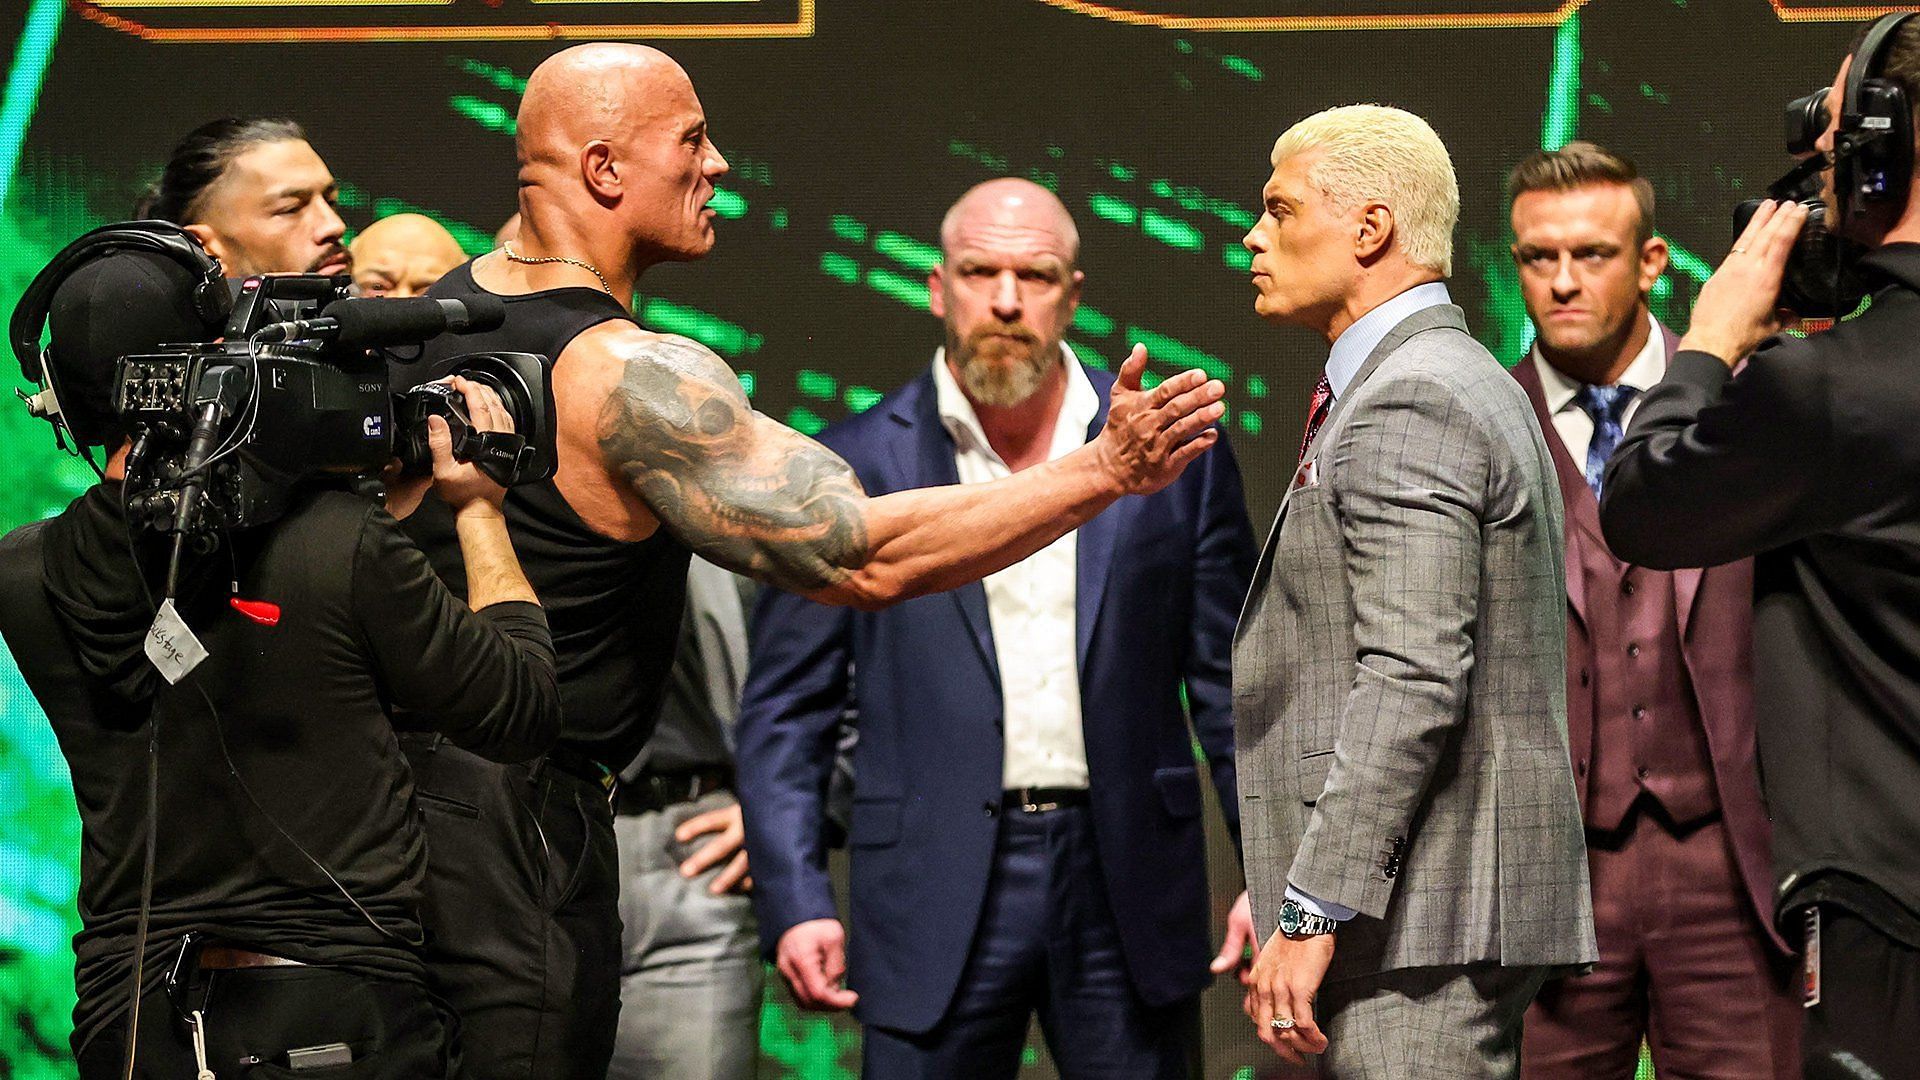 The Bloodline, The Rock, Triple H and others at the WWE WrestleMania 40 Kickoff event